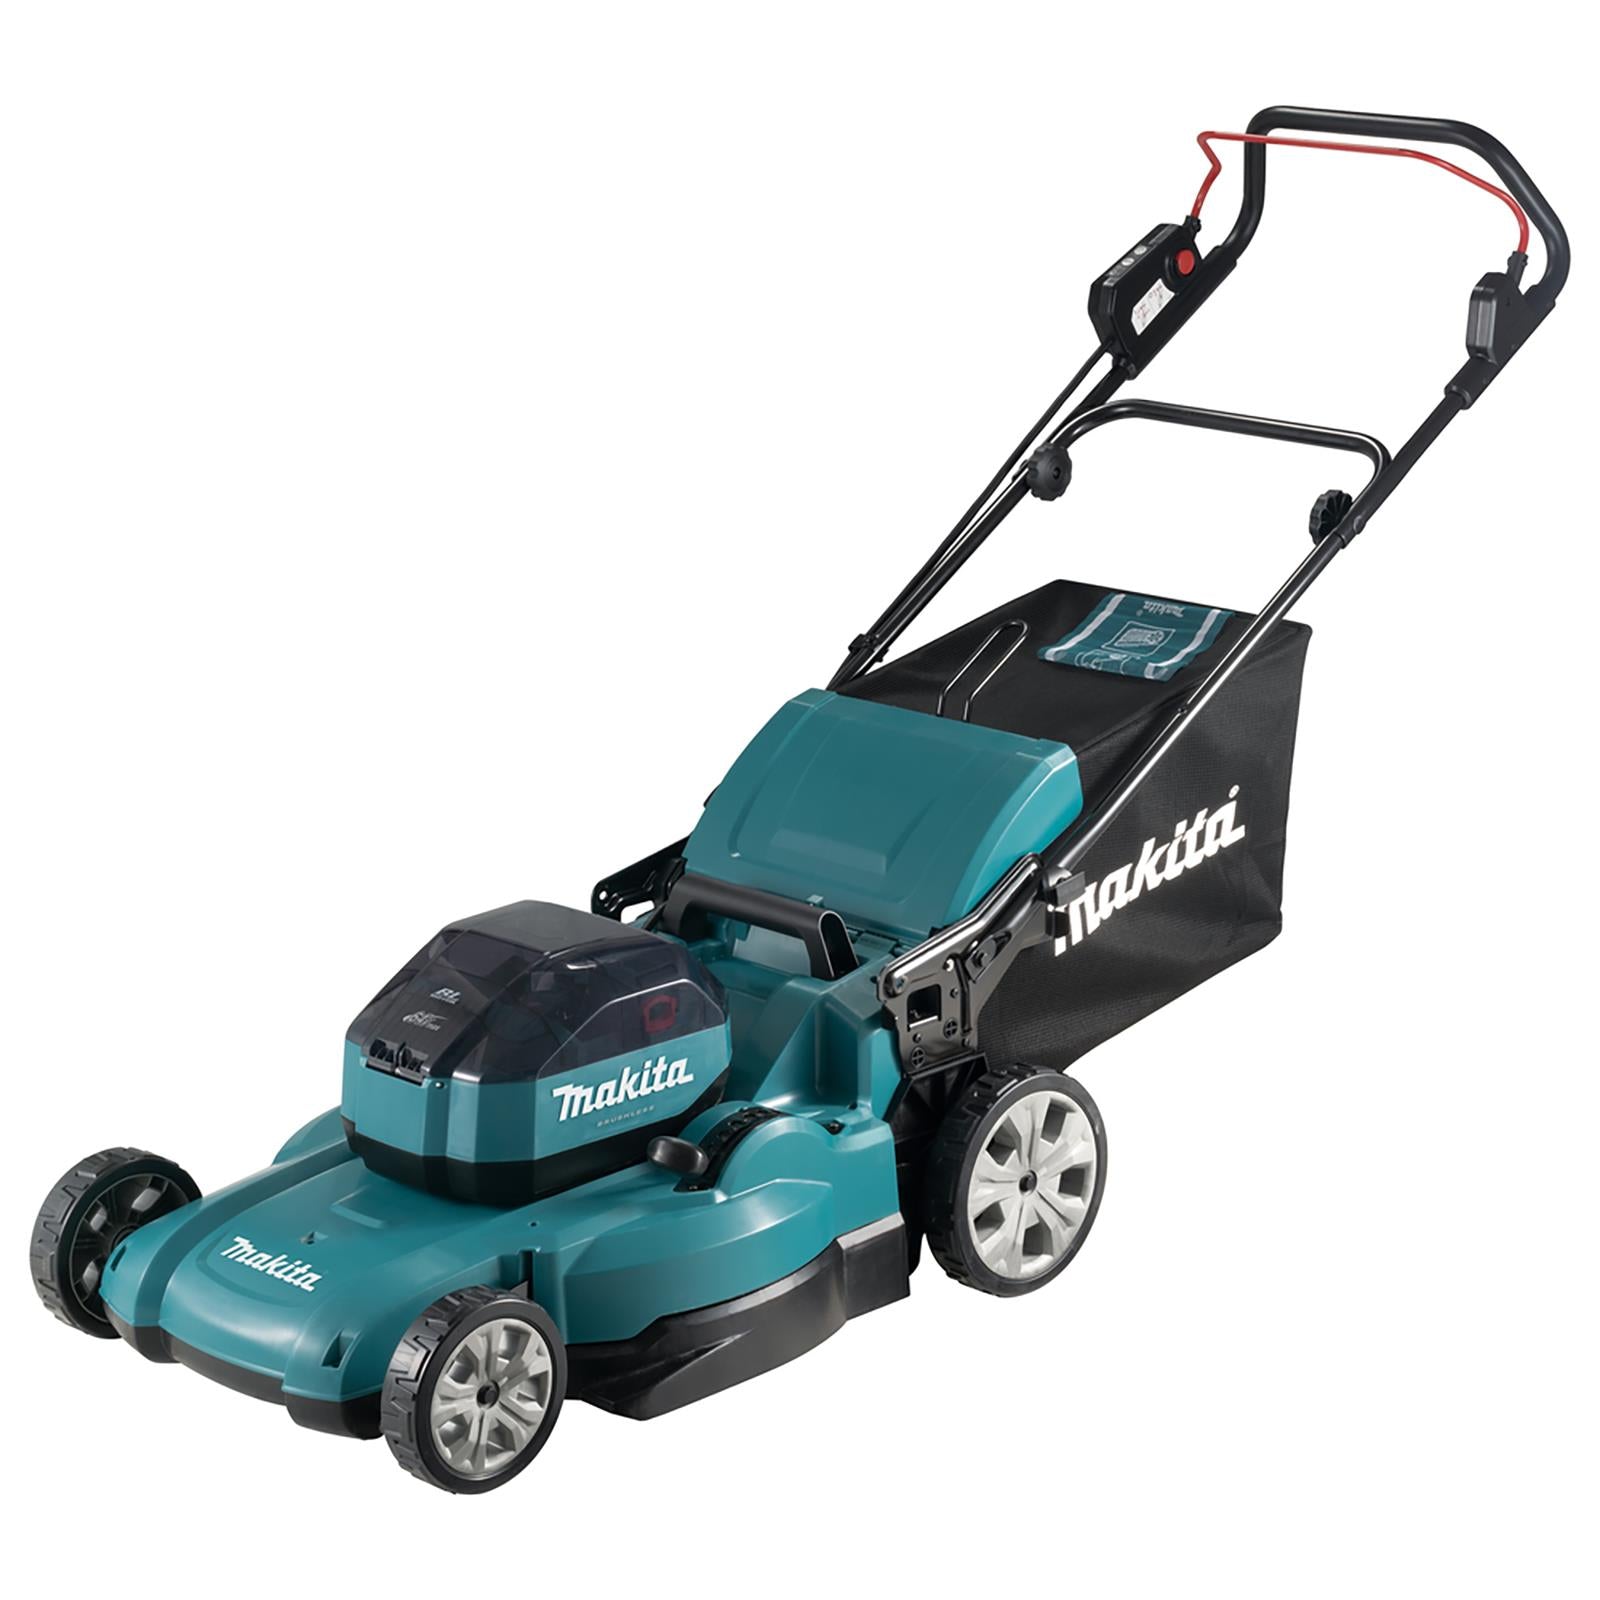 Makita 53cm Lawn Mower Kit 64V Max Li-ion Cordless Garden Grass Outdoor 4Ah Battery and Charger LM002JM101